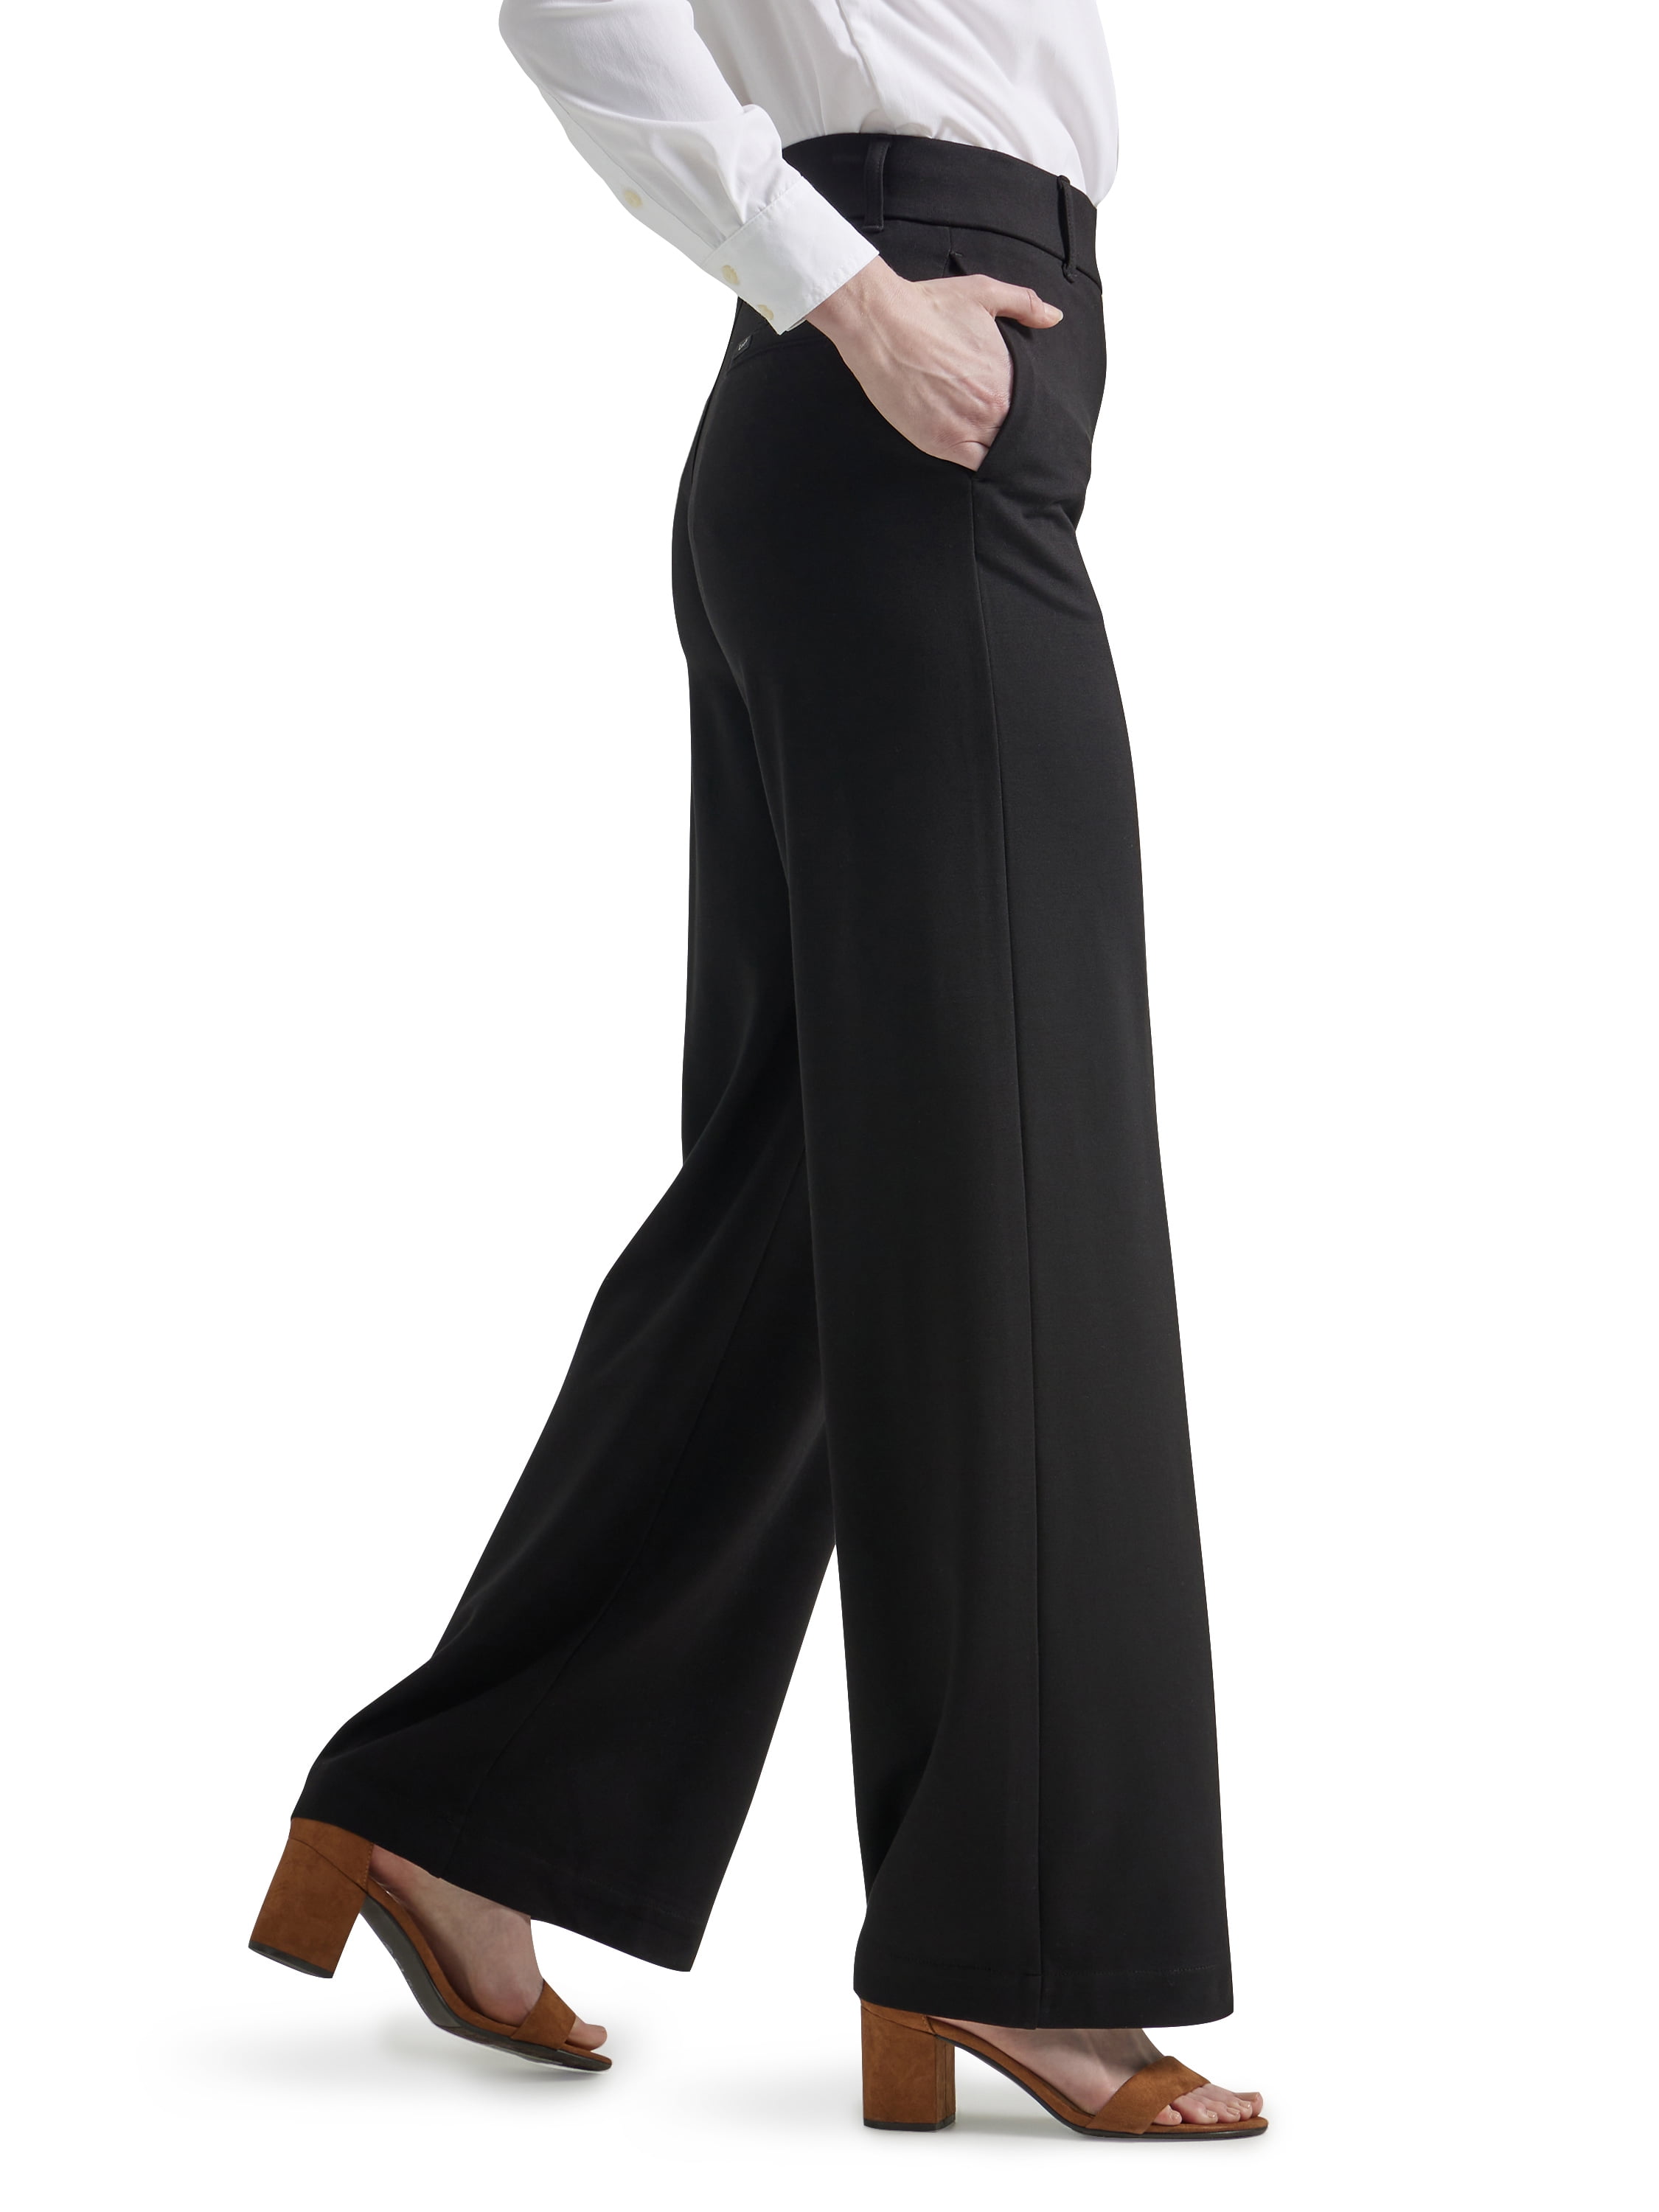 Lee® Women's Pull-On Comfort Waist A-Line Knit Pant 